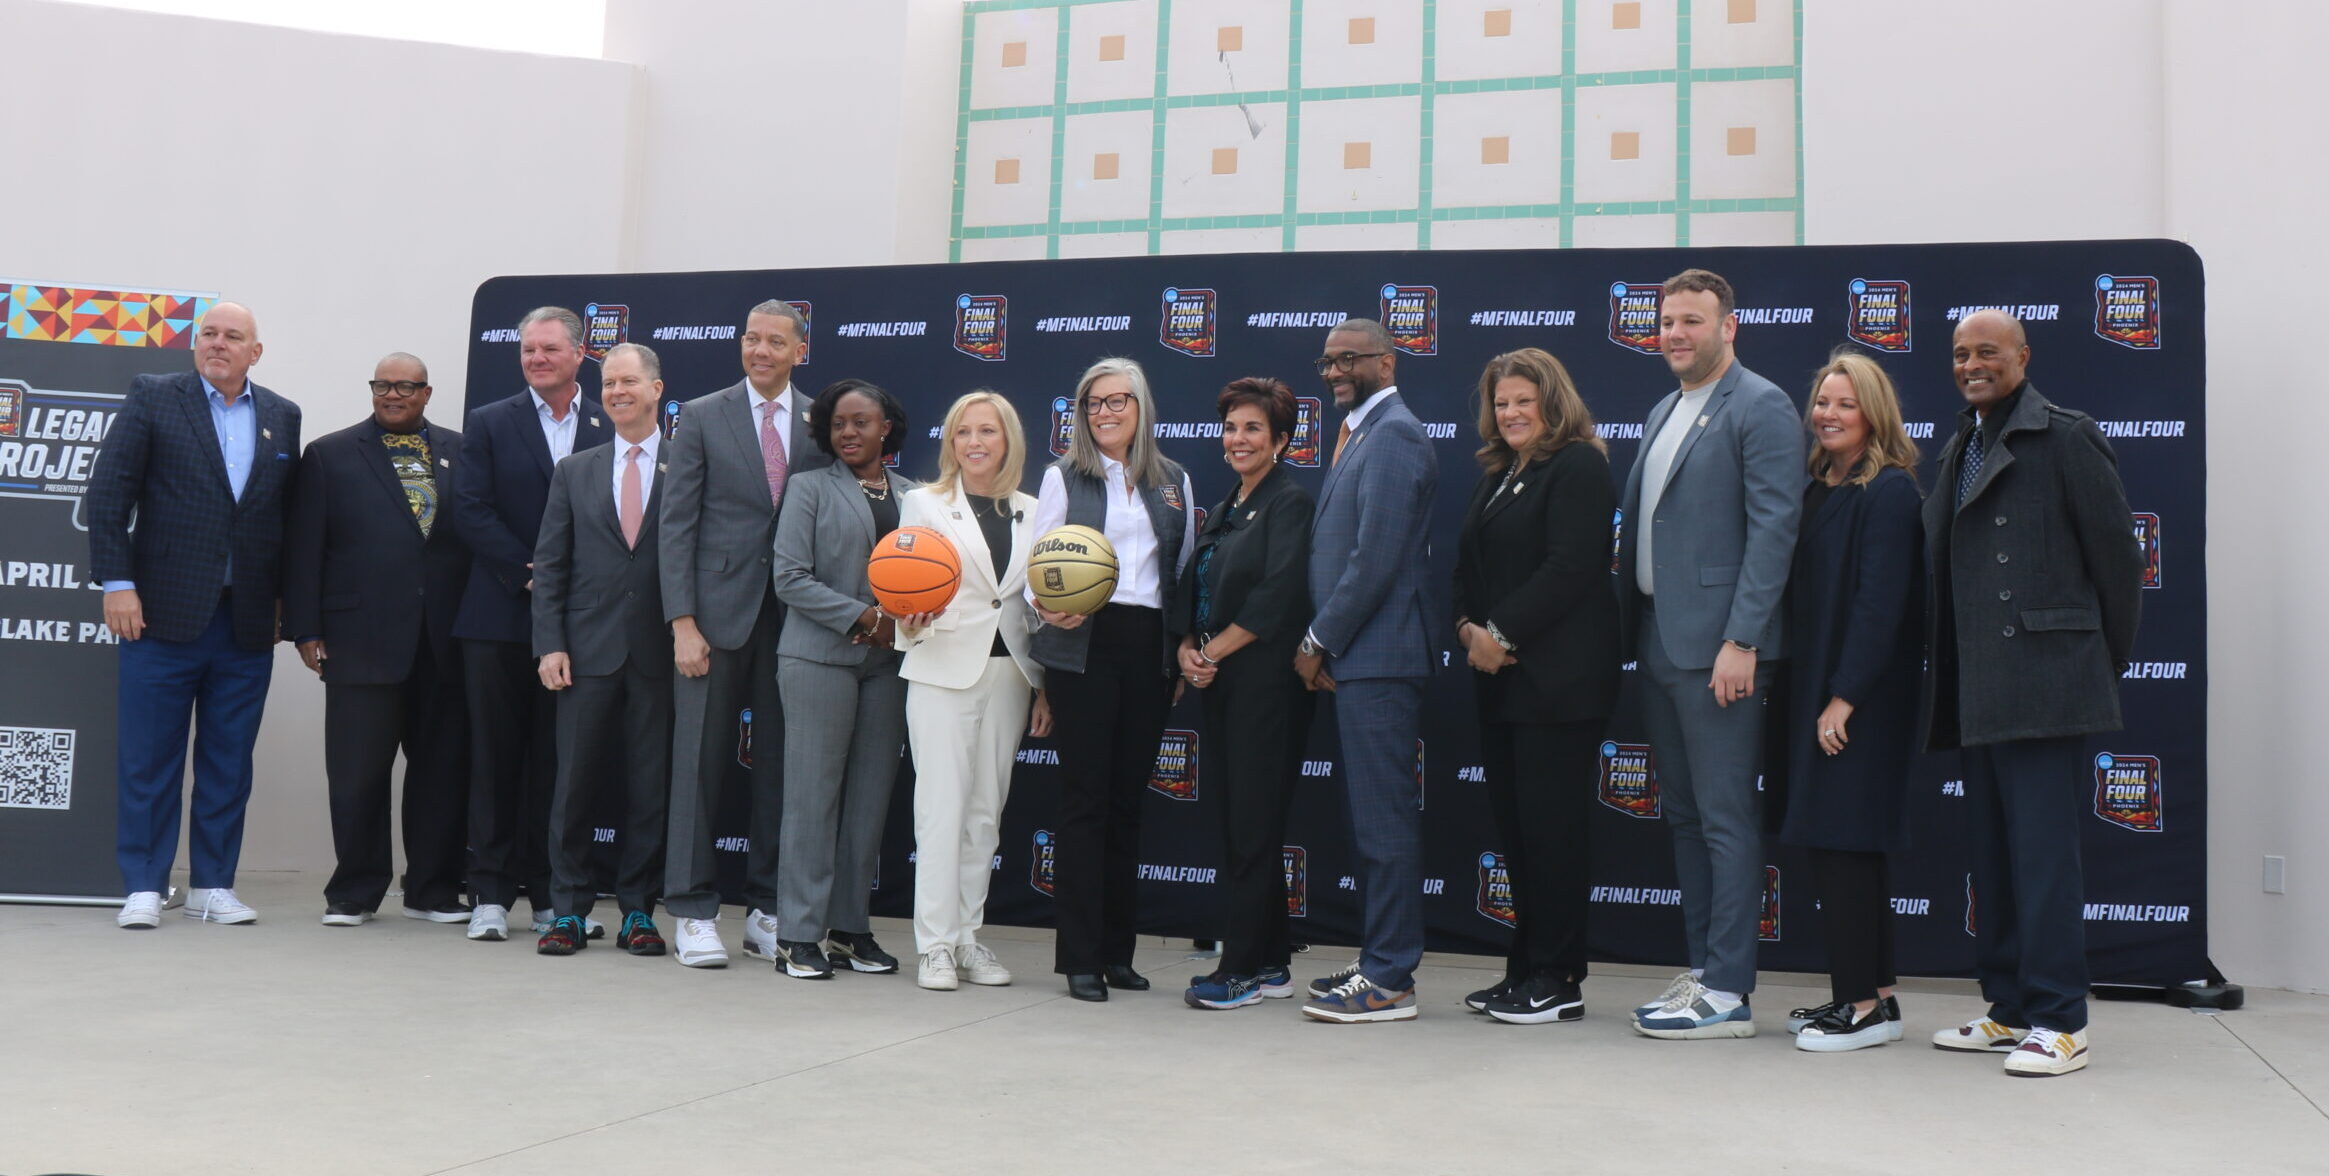 The panelists and NCAA Men's Final Four board members, highlighted by Arizona governor Katie Hobbs, pose for a picture after today's Men's Final Four Tip-Off presser.